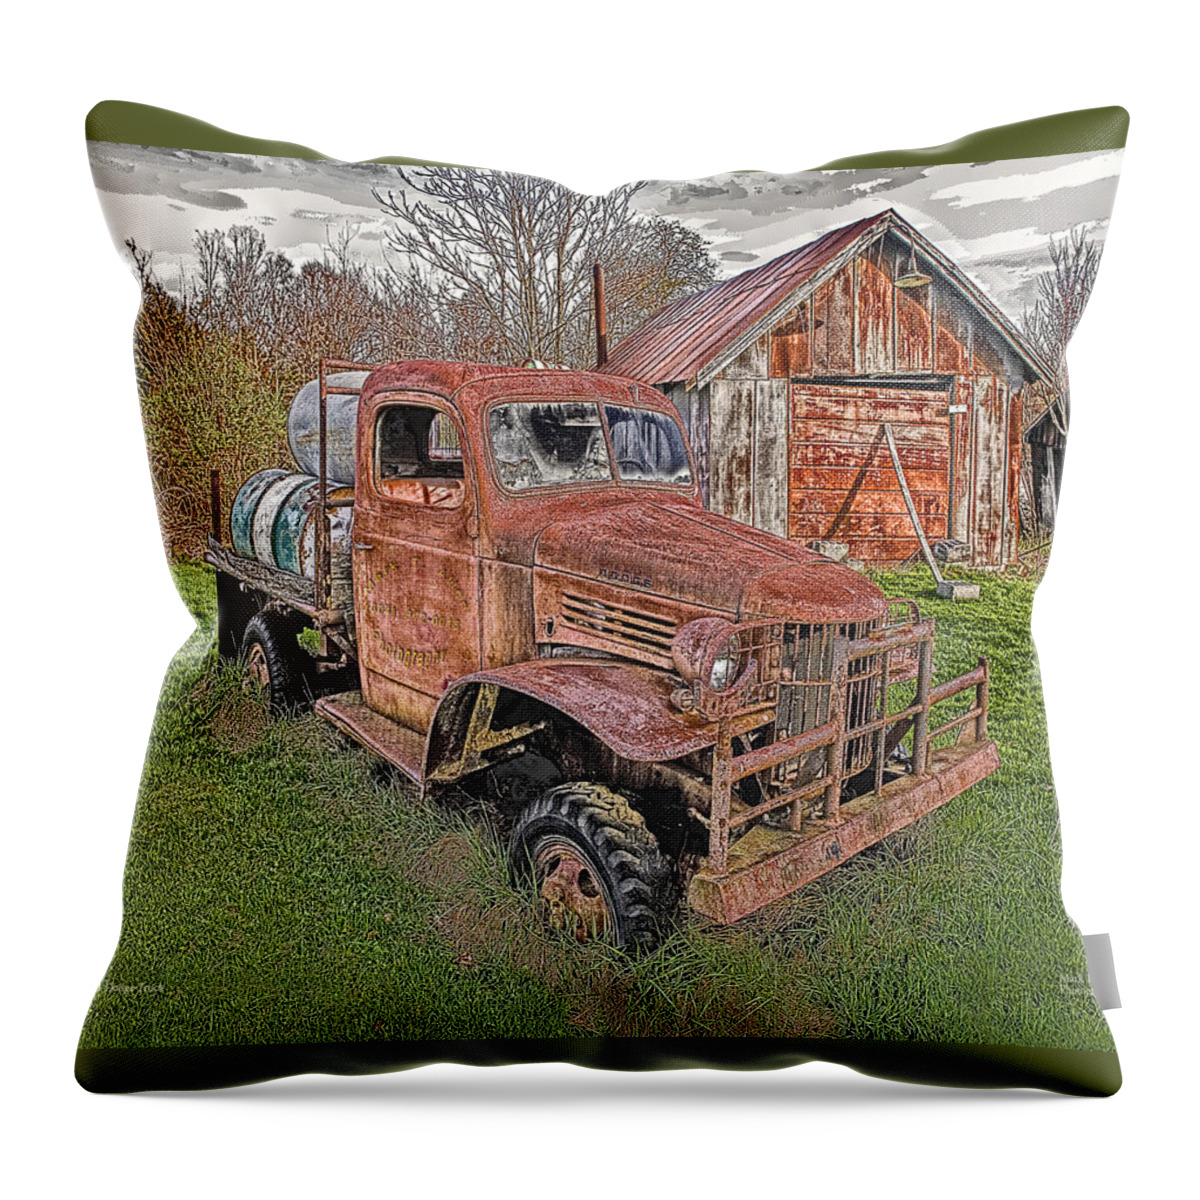 Scenicfotos Throw Pillow featuring the photograph 1941 Dodge Truck #2 by Mark Allen